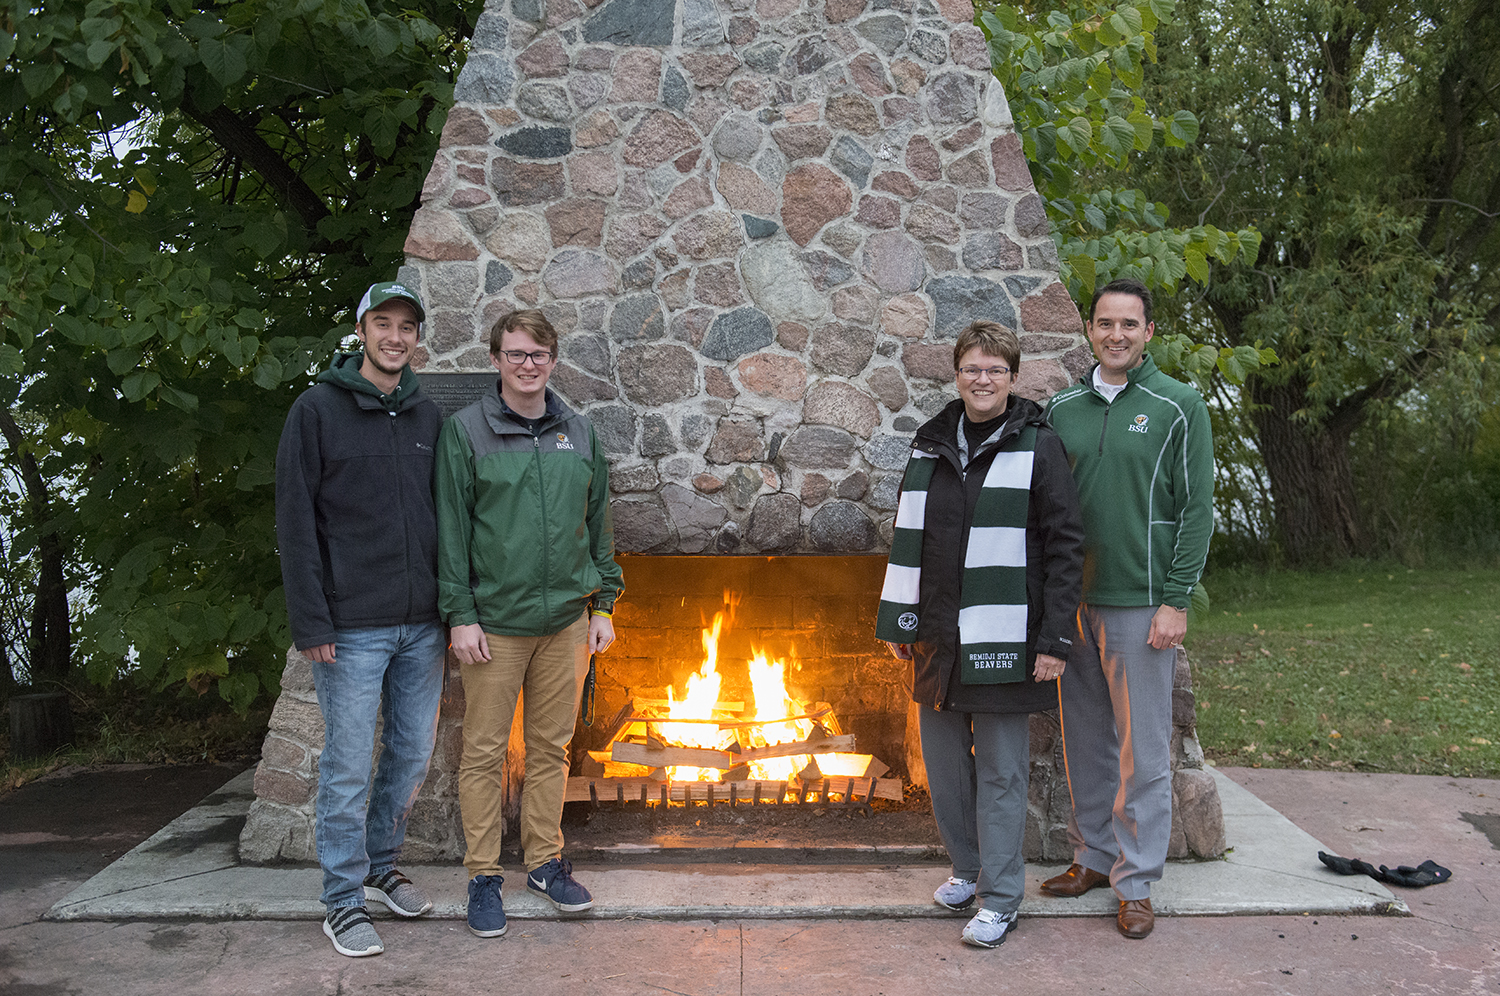 BSU began a new Homecoming tradition in 2019 by lighting the lakeside fireplace on Thursday evening and keeping it lit through the conclusion of the Carl O. Thompson Memorial Concert, BSU’s traditional final event of Homecoming week, on Sunday afternoon.